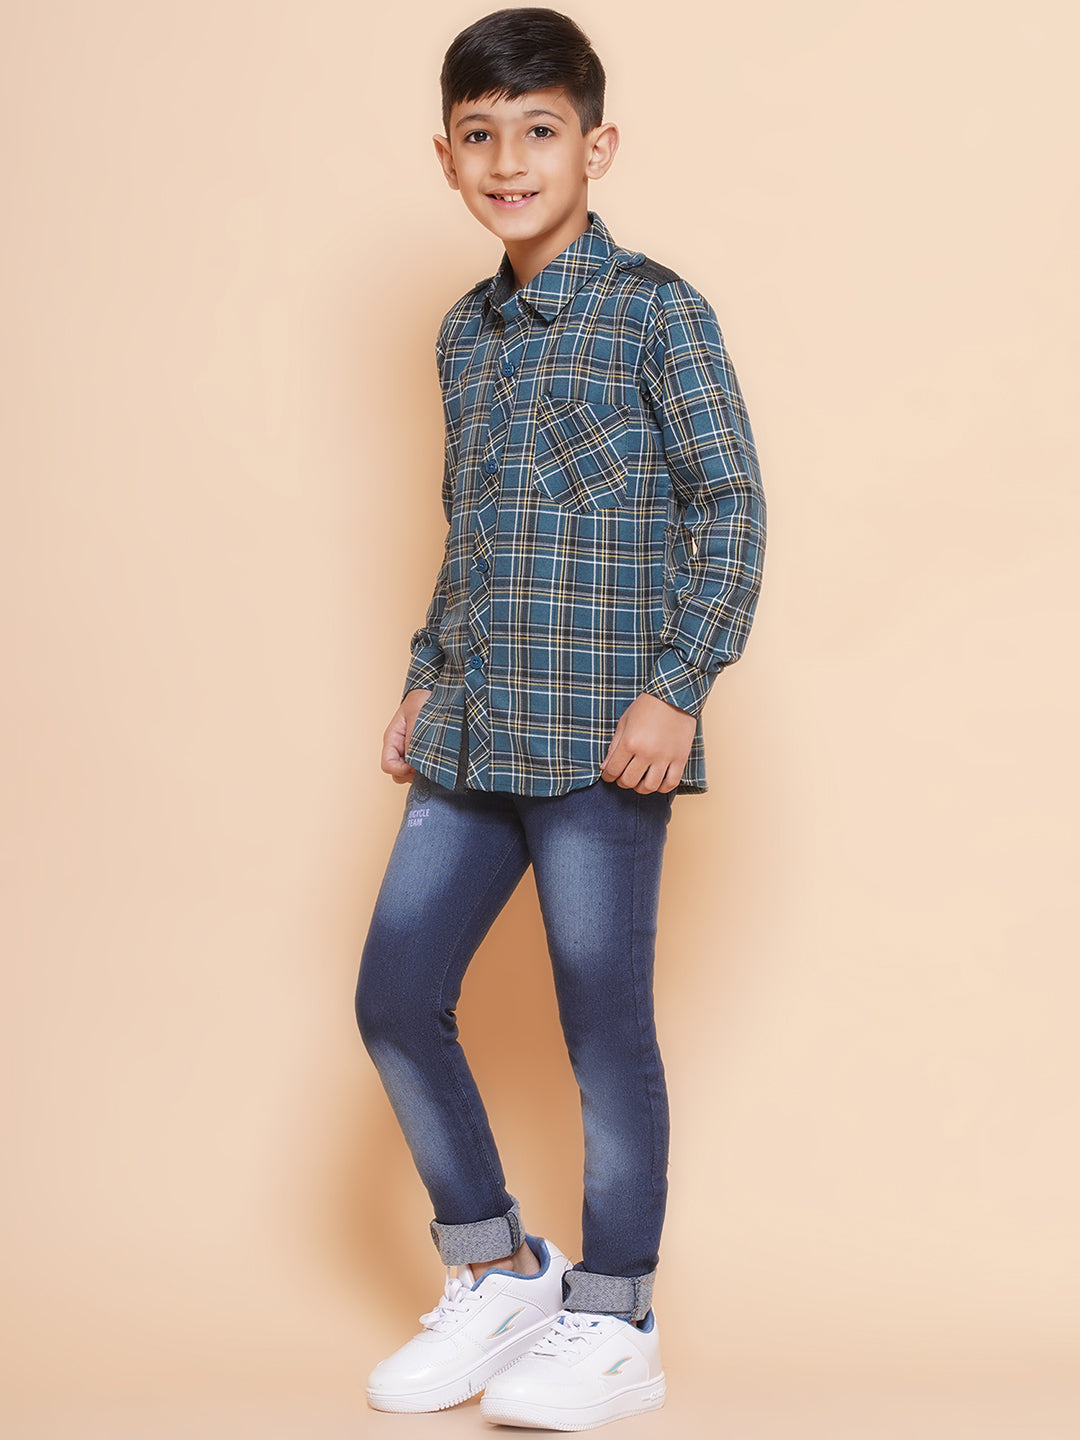 Kids Teal Shirt and Jeans Clothing Set For Boys